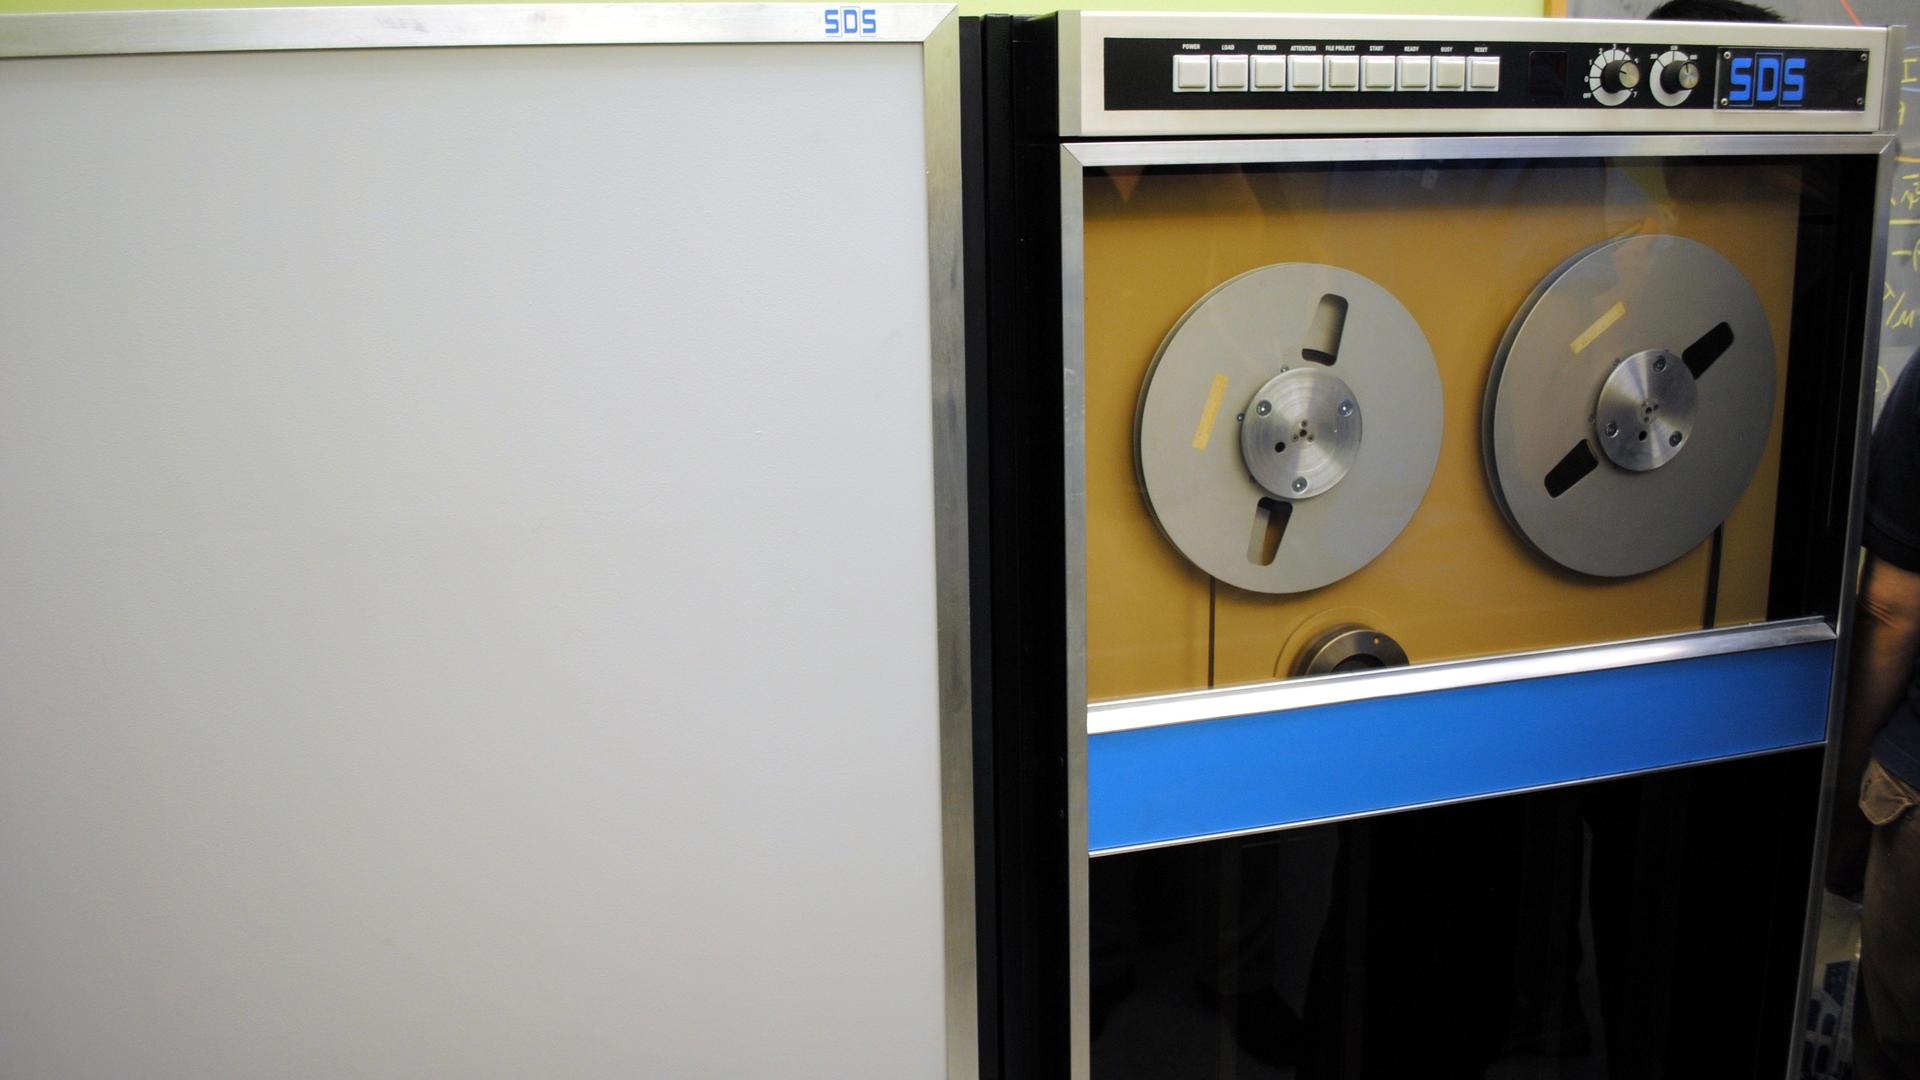 This SDS Sigma 7 computer sent the first message over the predecessor of the internet in 1969. 